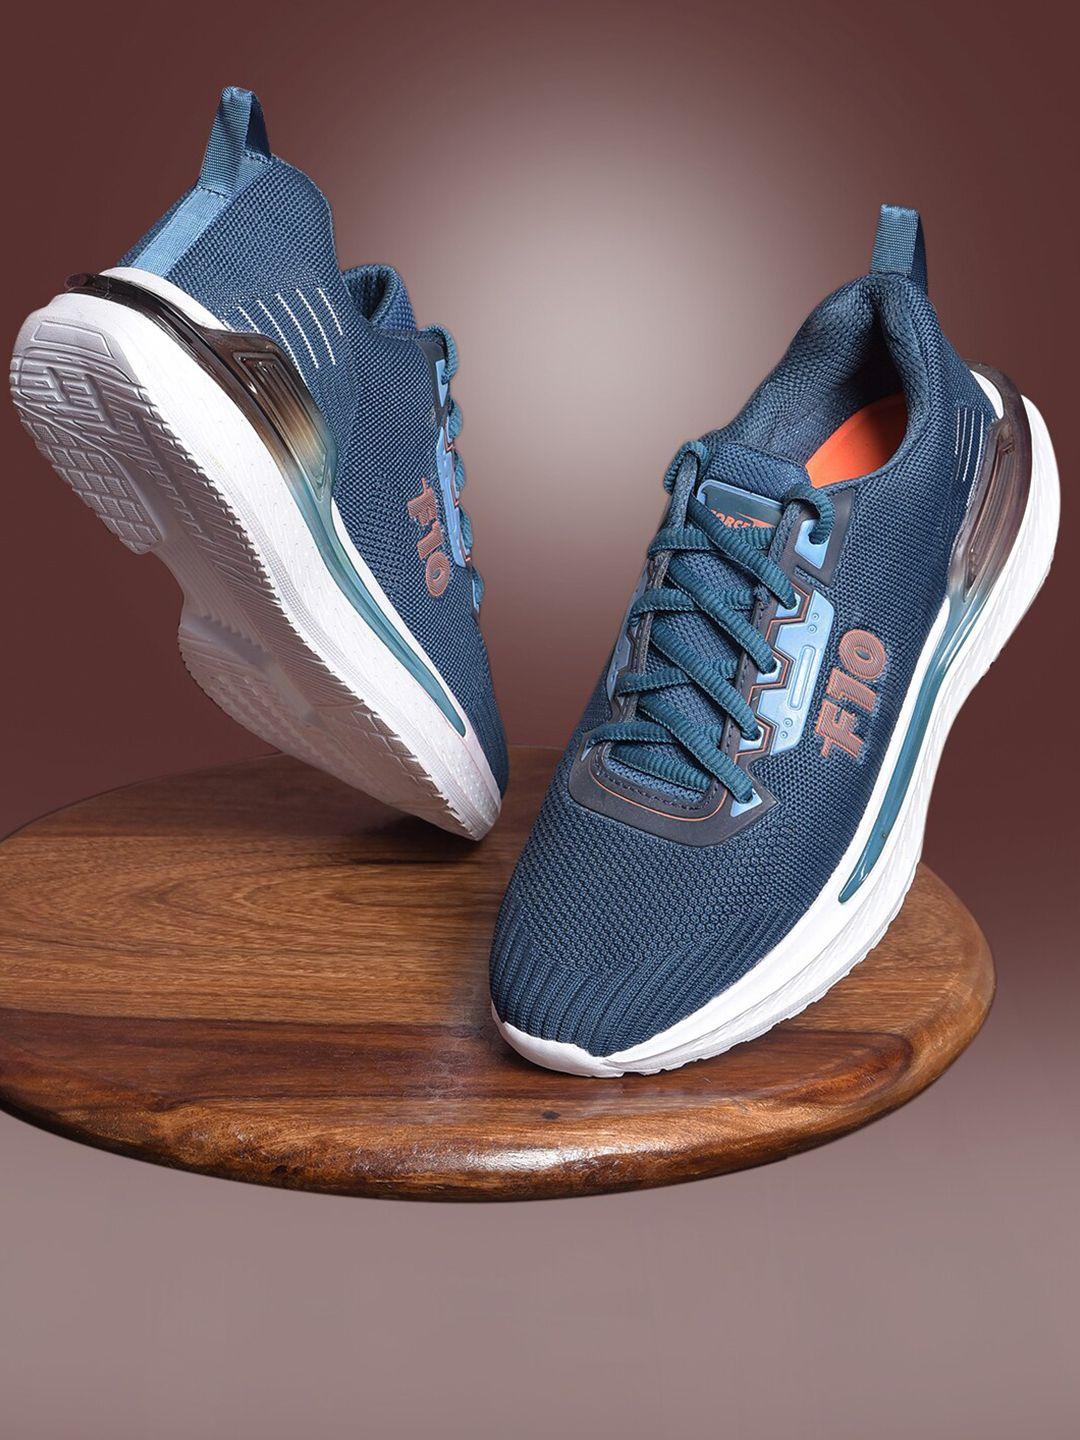 liberty-men-leather-running-sports-shoes